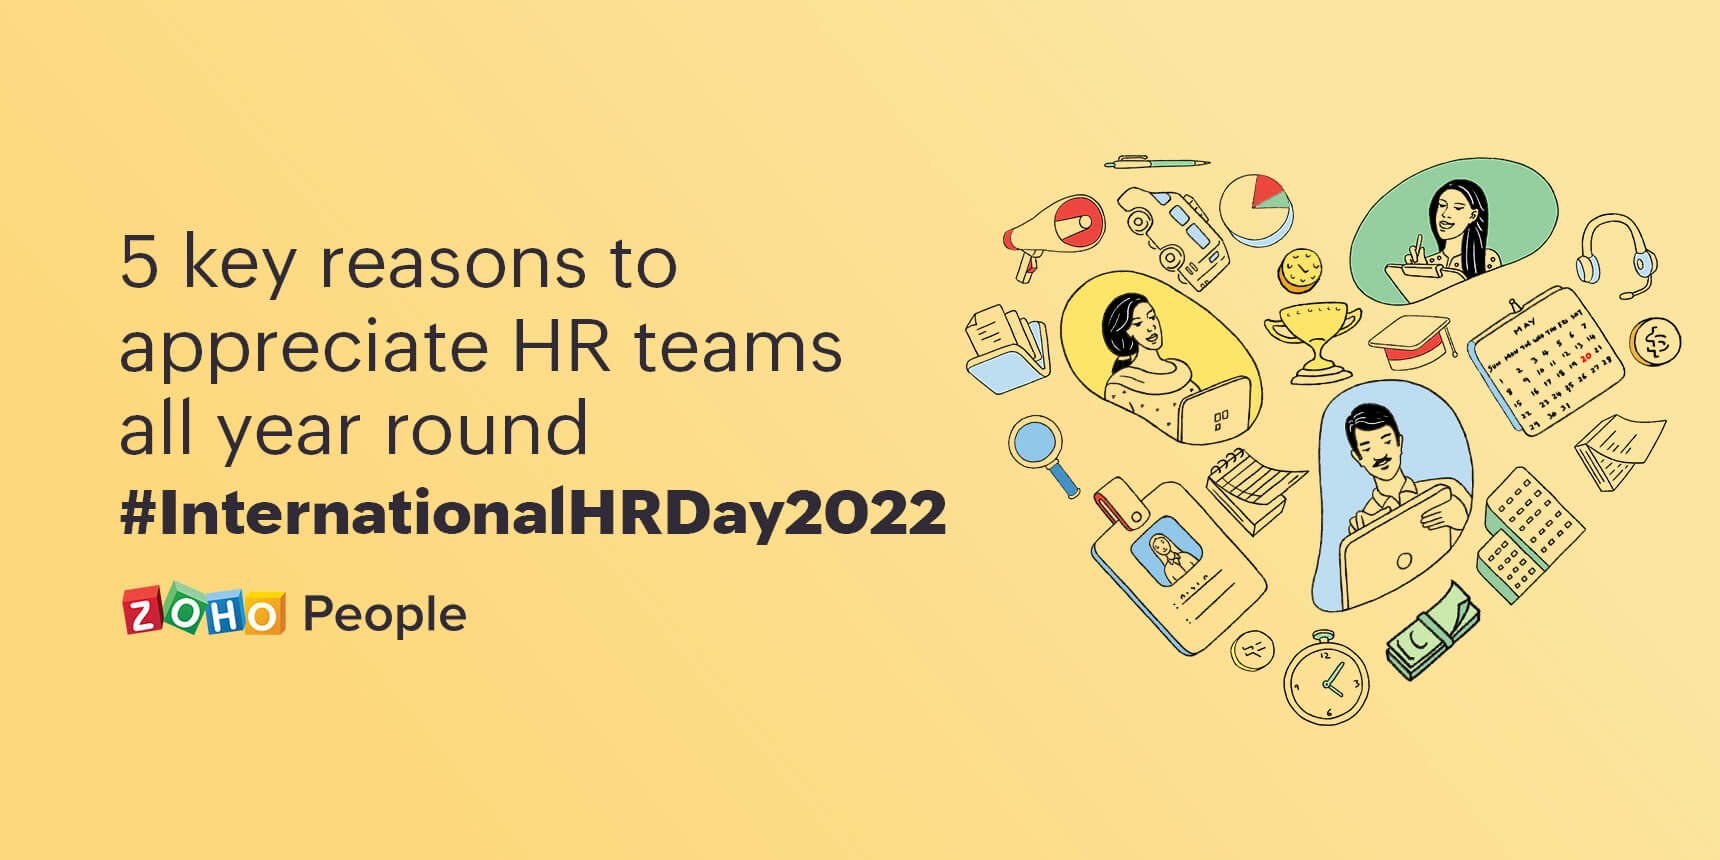 International HR Day 2022 5 reasons why you should appreciate your HR